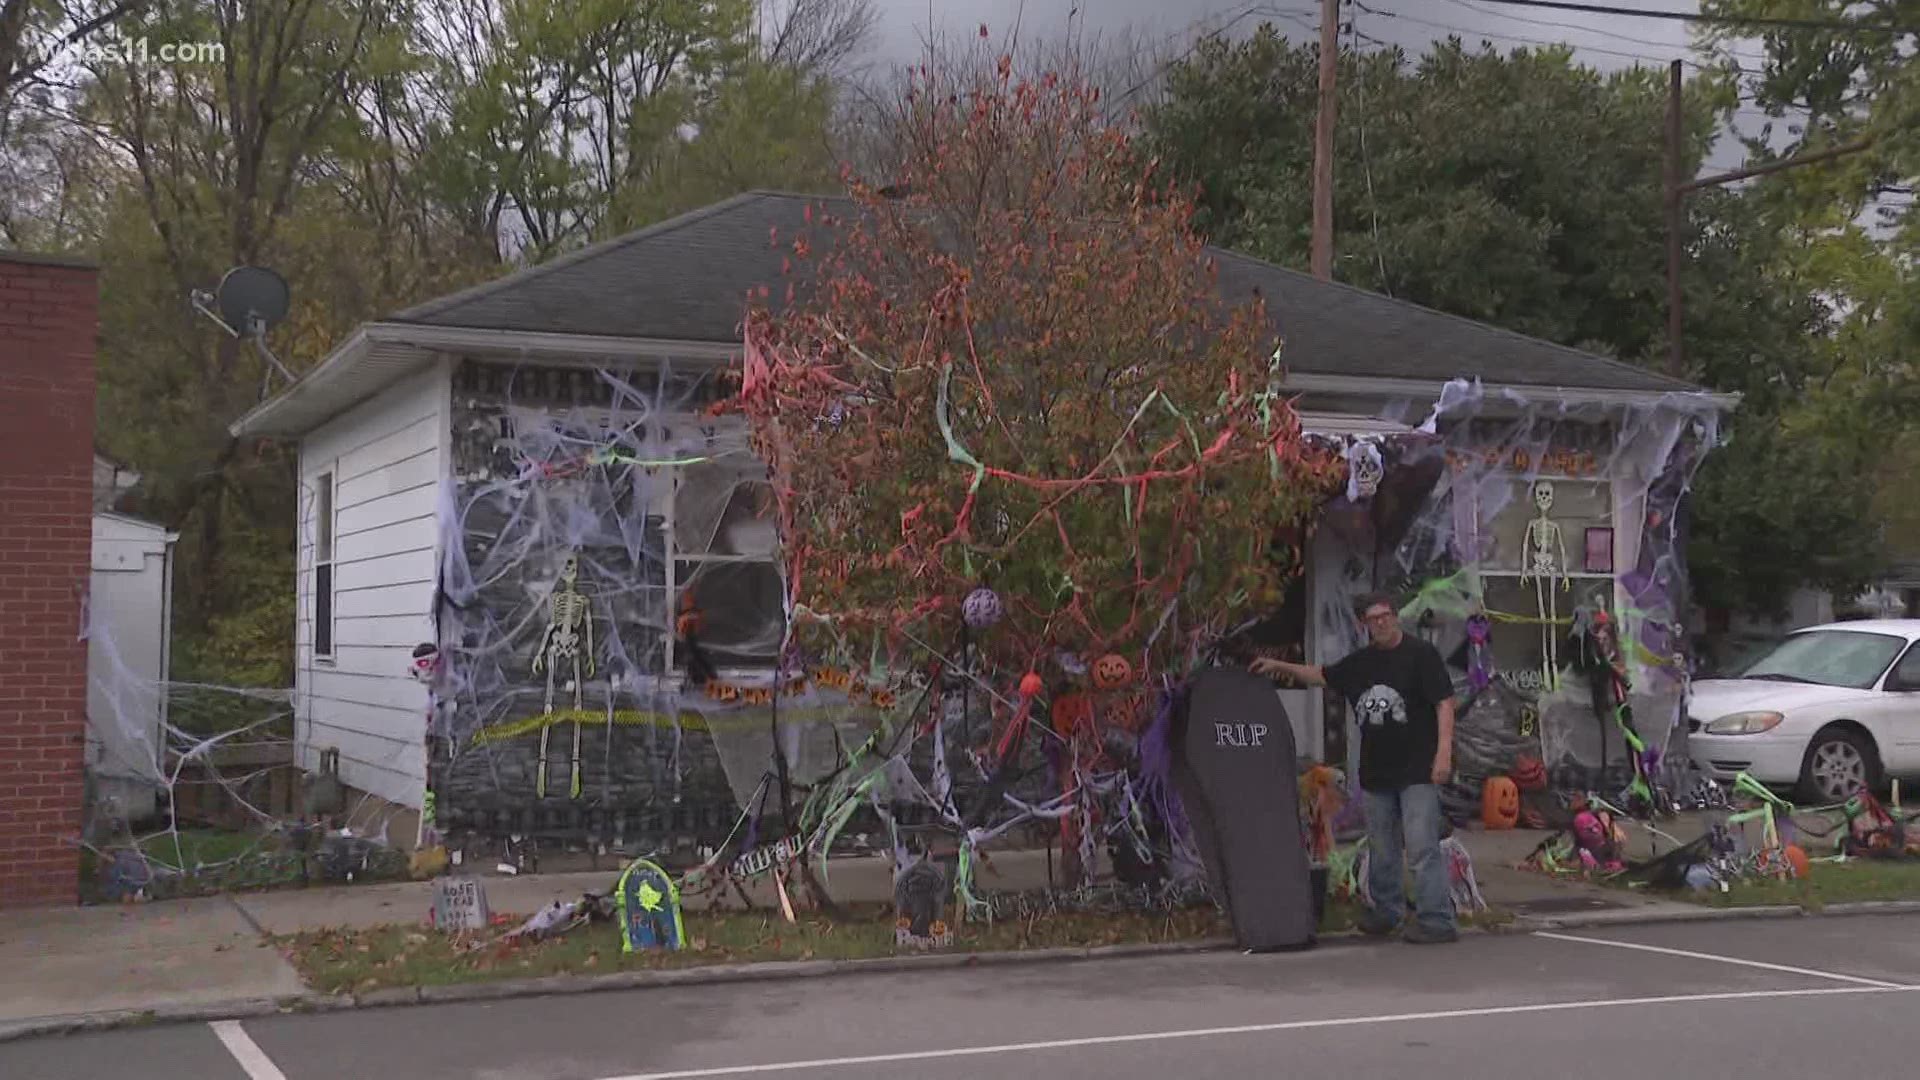 John Fogel has been decorating his house for about 15 years, every Halloween.